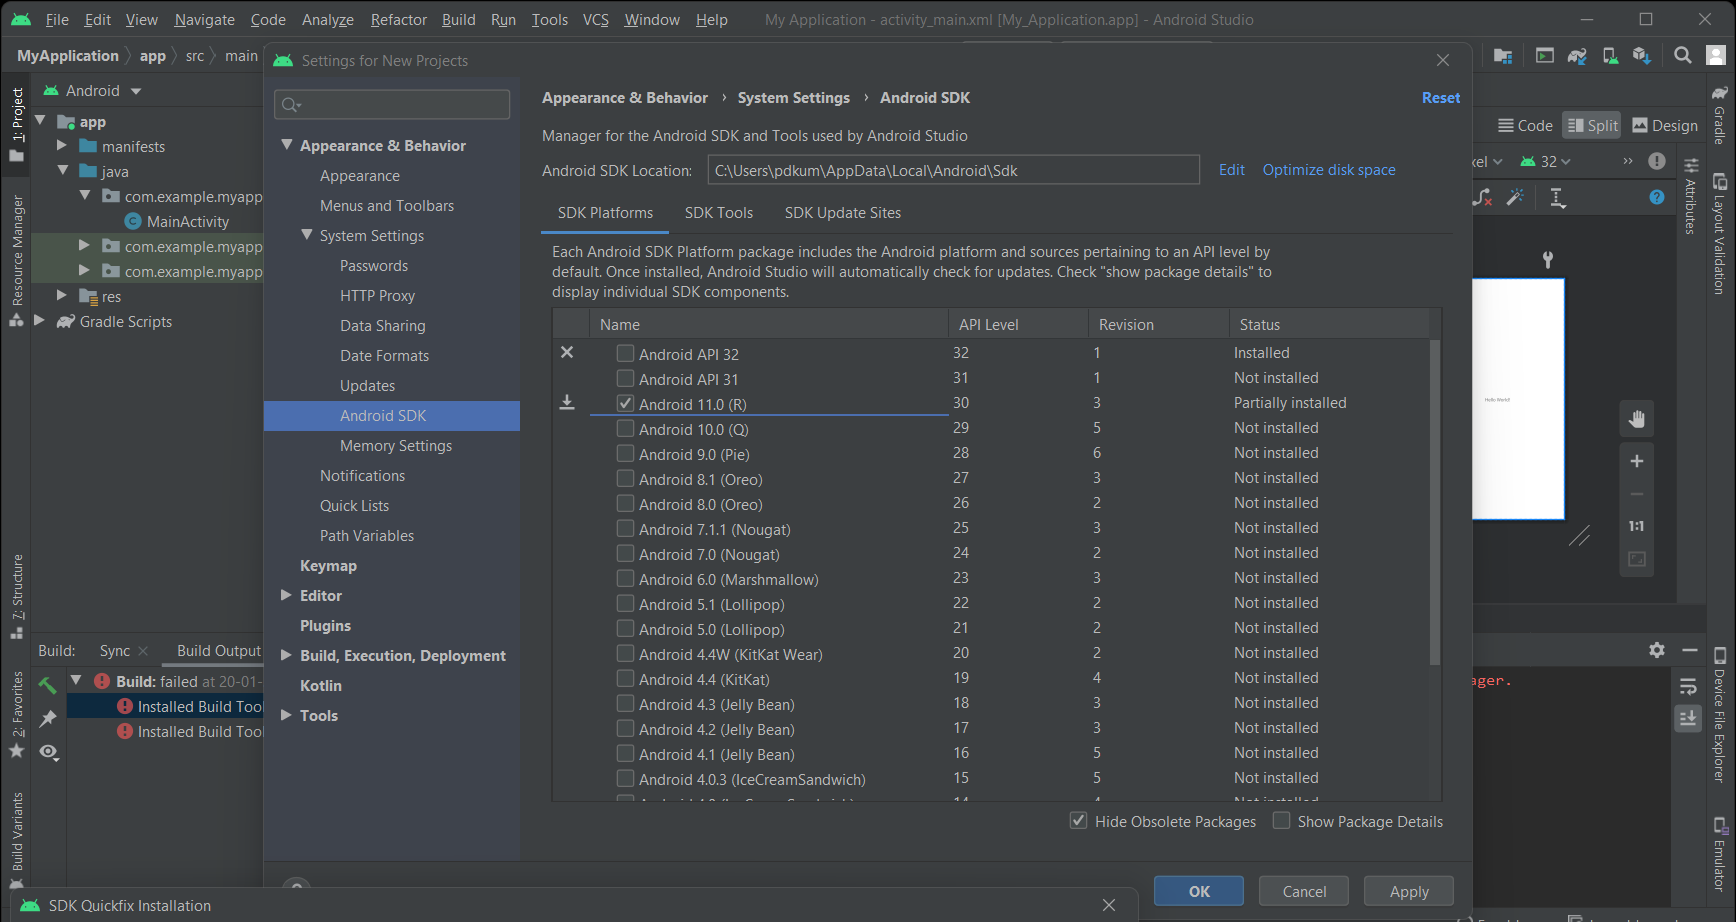 install again using the SDK Manager in android studio